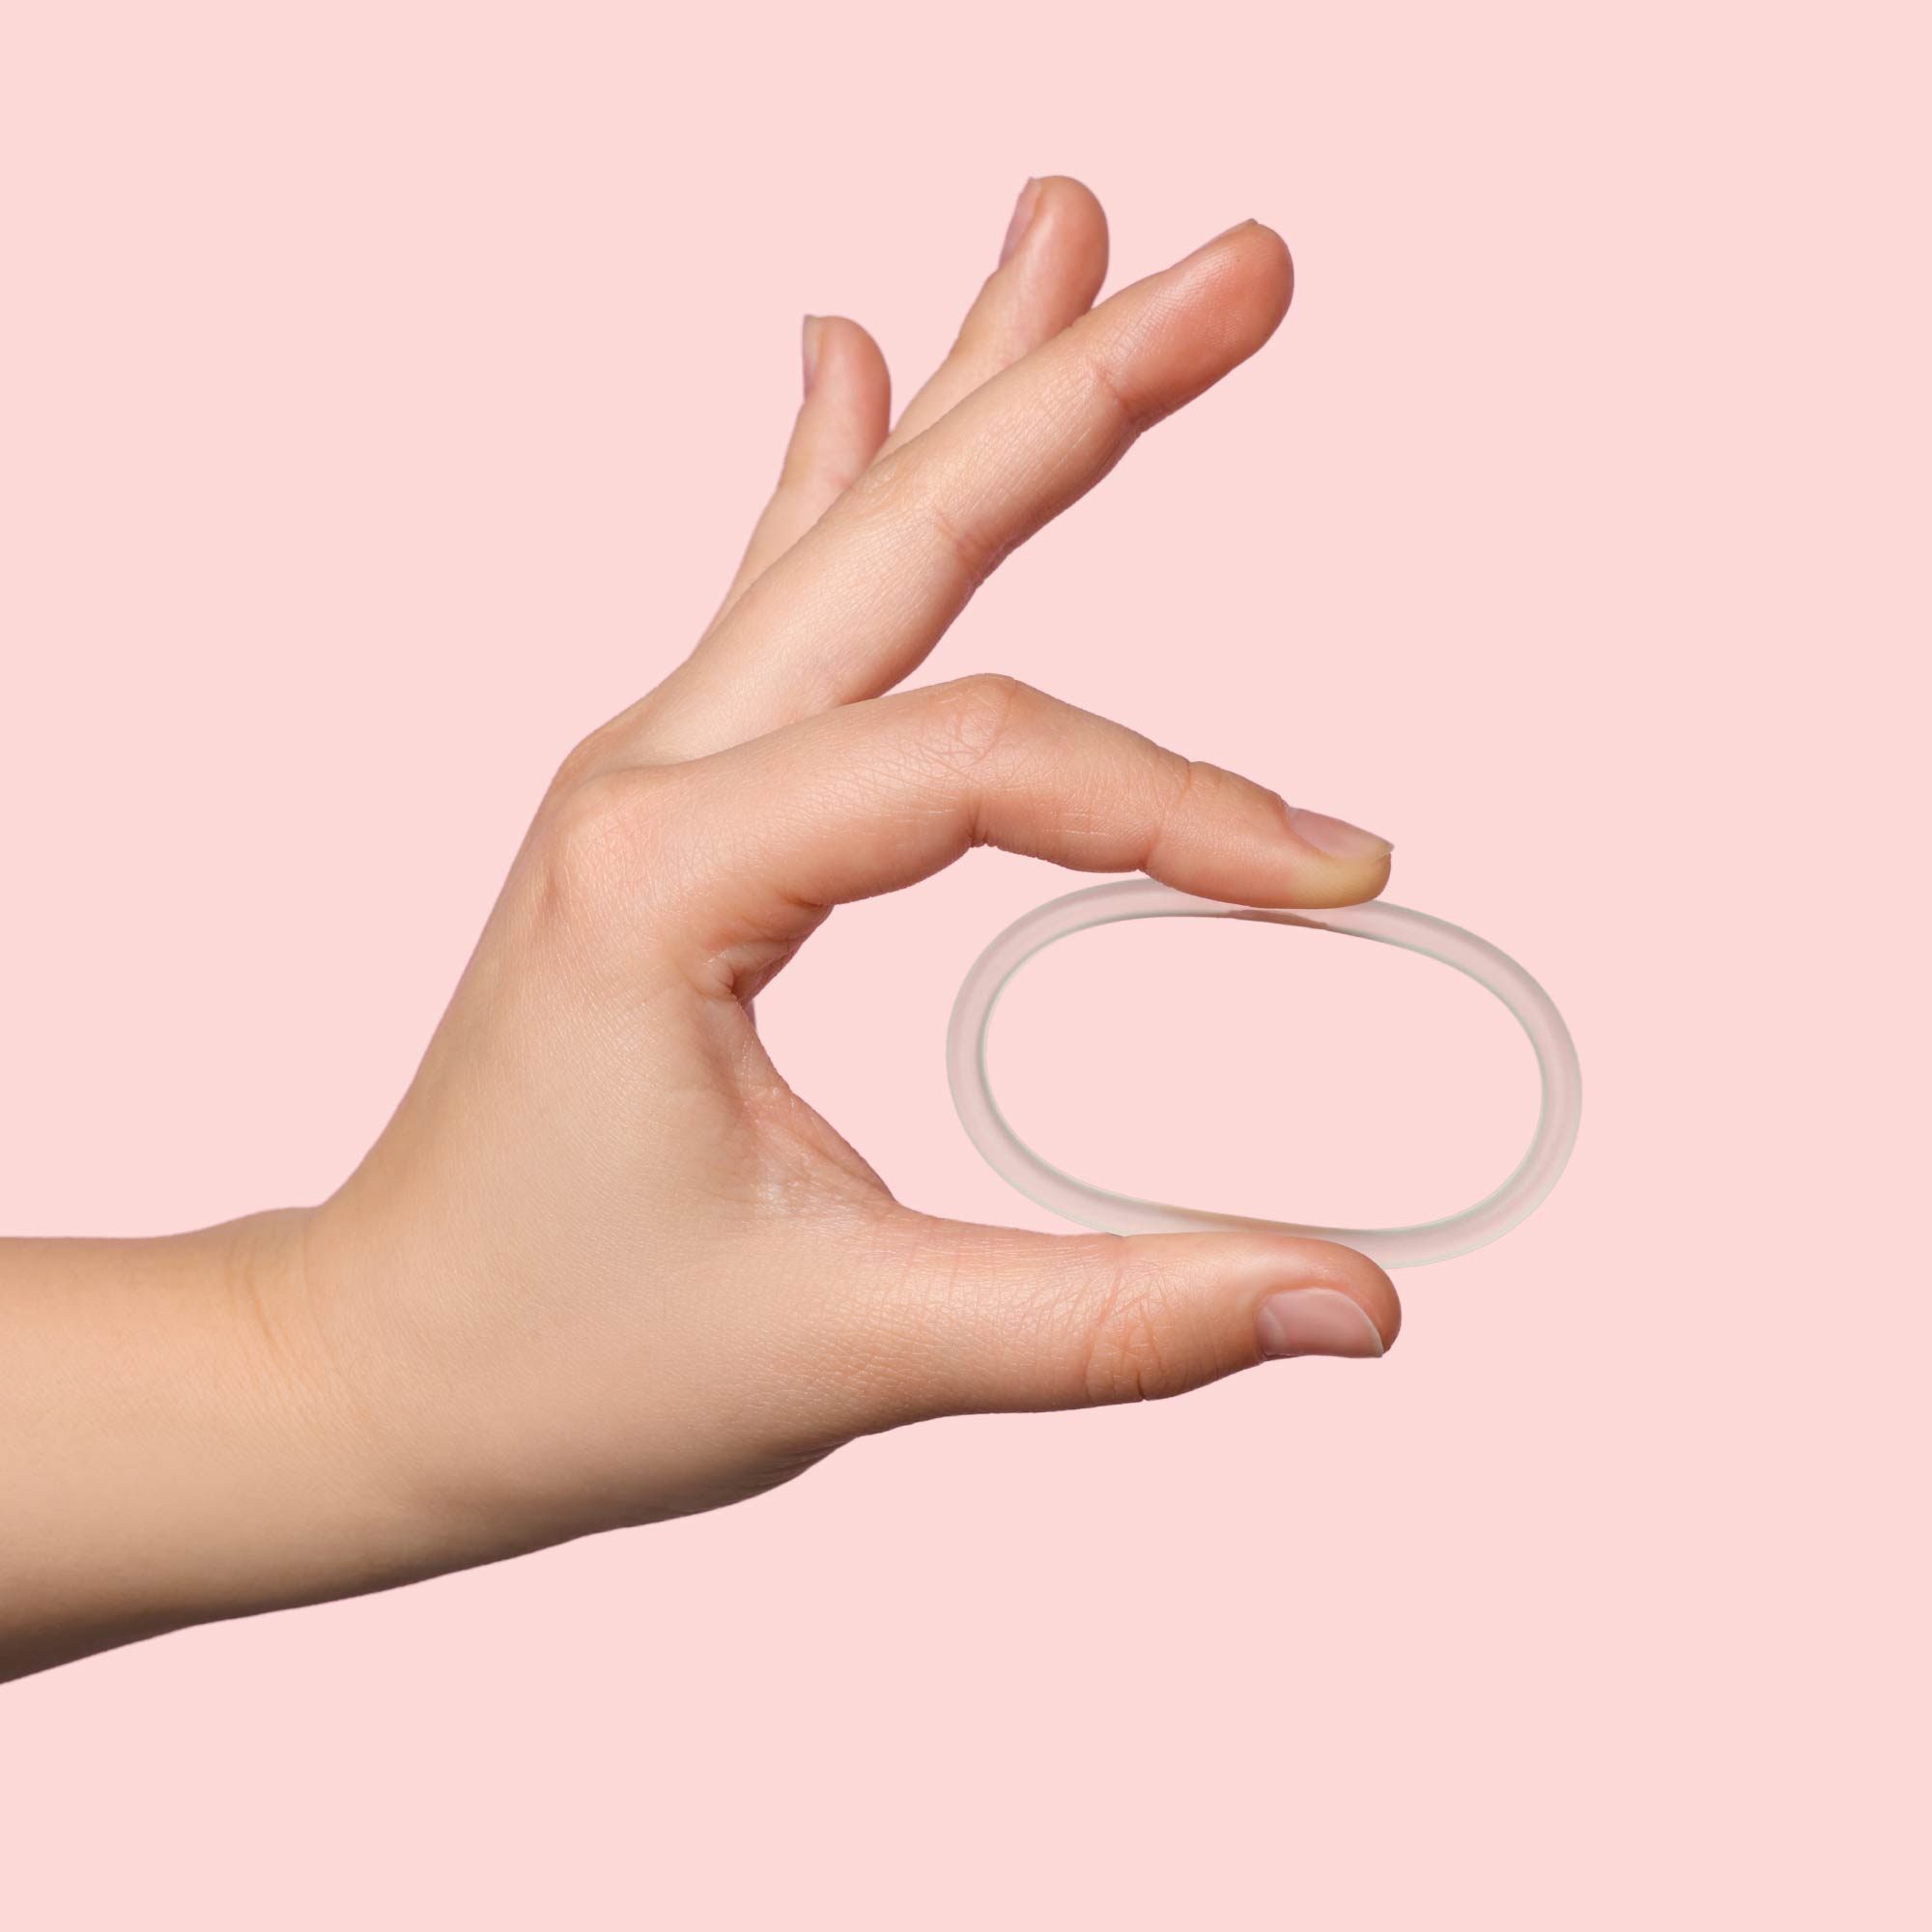 IPM's dapivirine ring could be the future of female-first HIV prevention